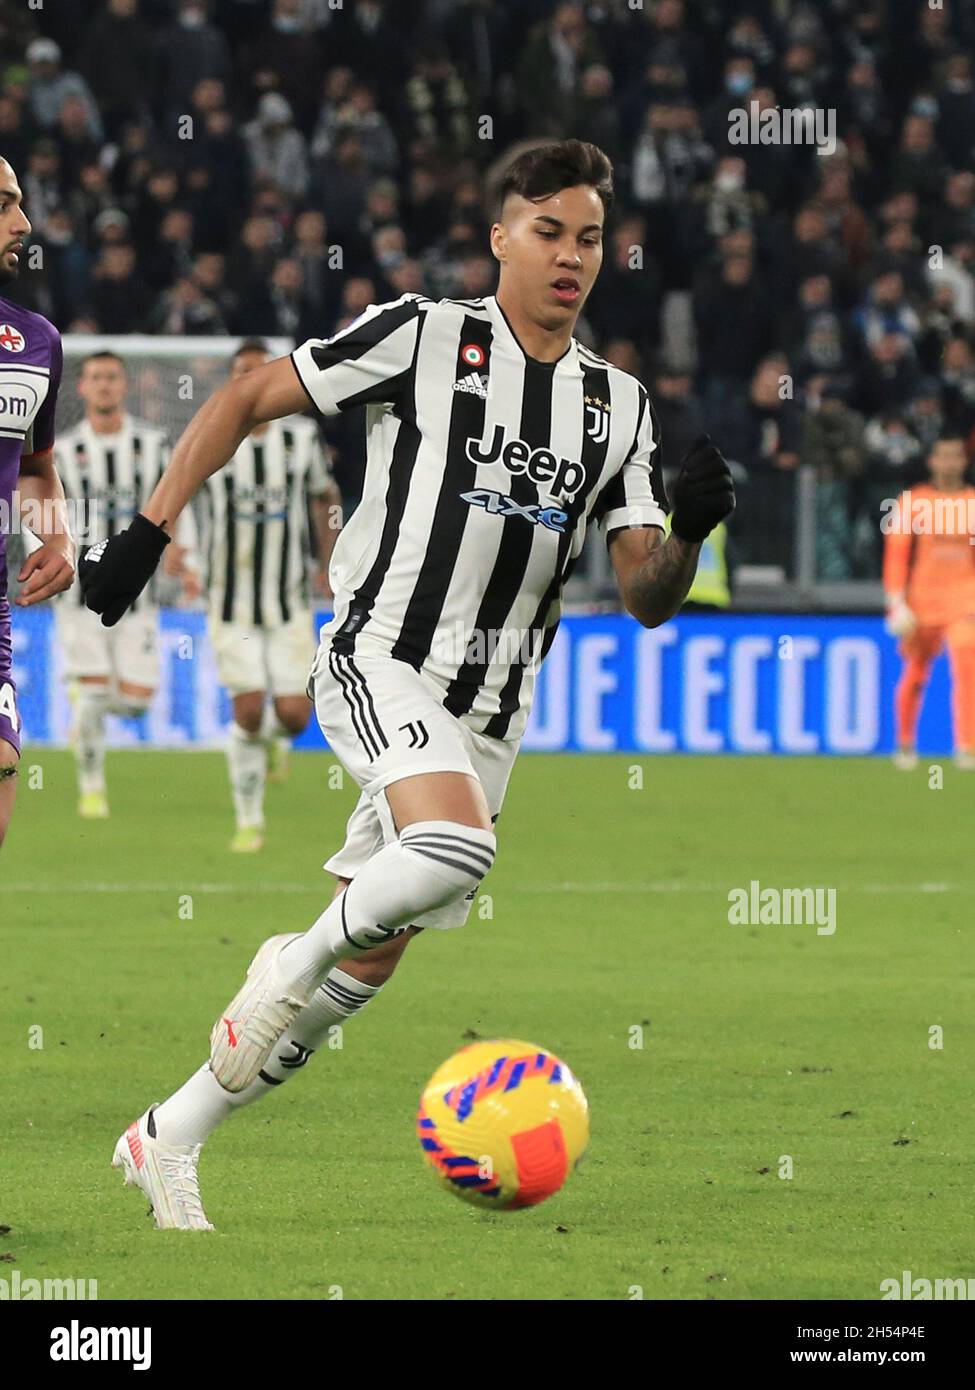 Turin, Italy. 06th Nov, 2021. Kaio Jorge (Juventus FC) during Juventus FC  vs ACF Fiorentina, italian soccer Serie A match in Turin, Italy, November  06 2021 Credit: Independent Photo Agency/Alamy Live News